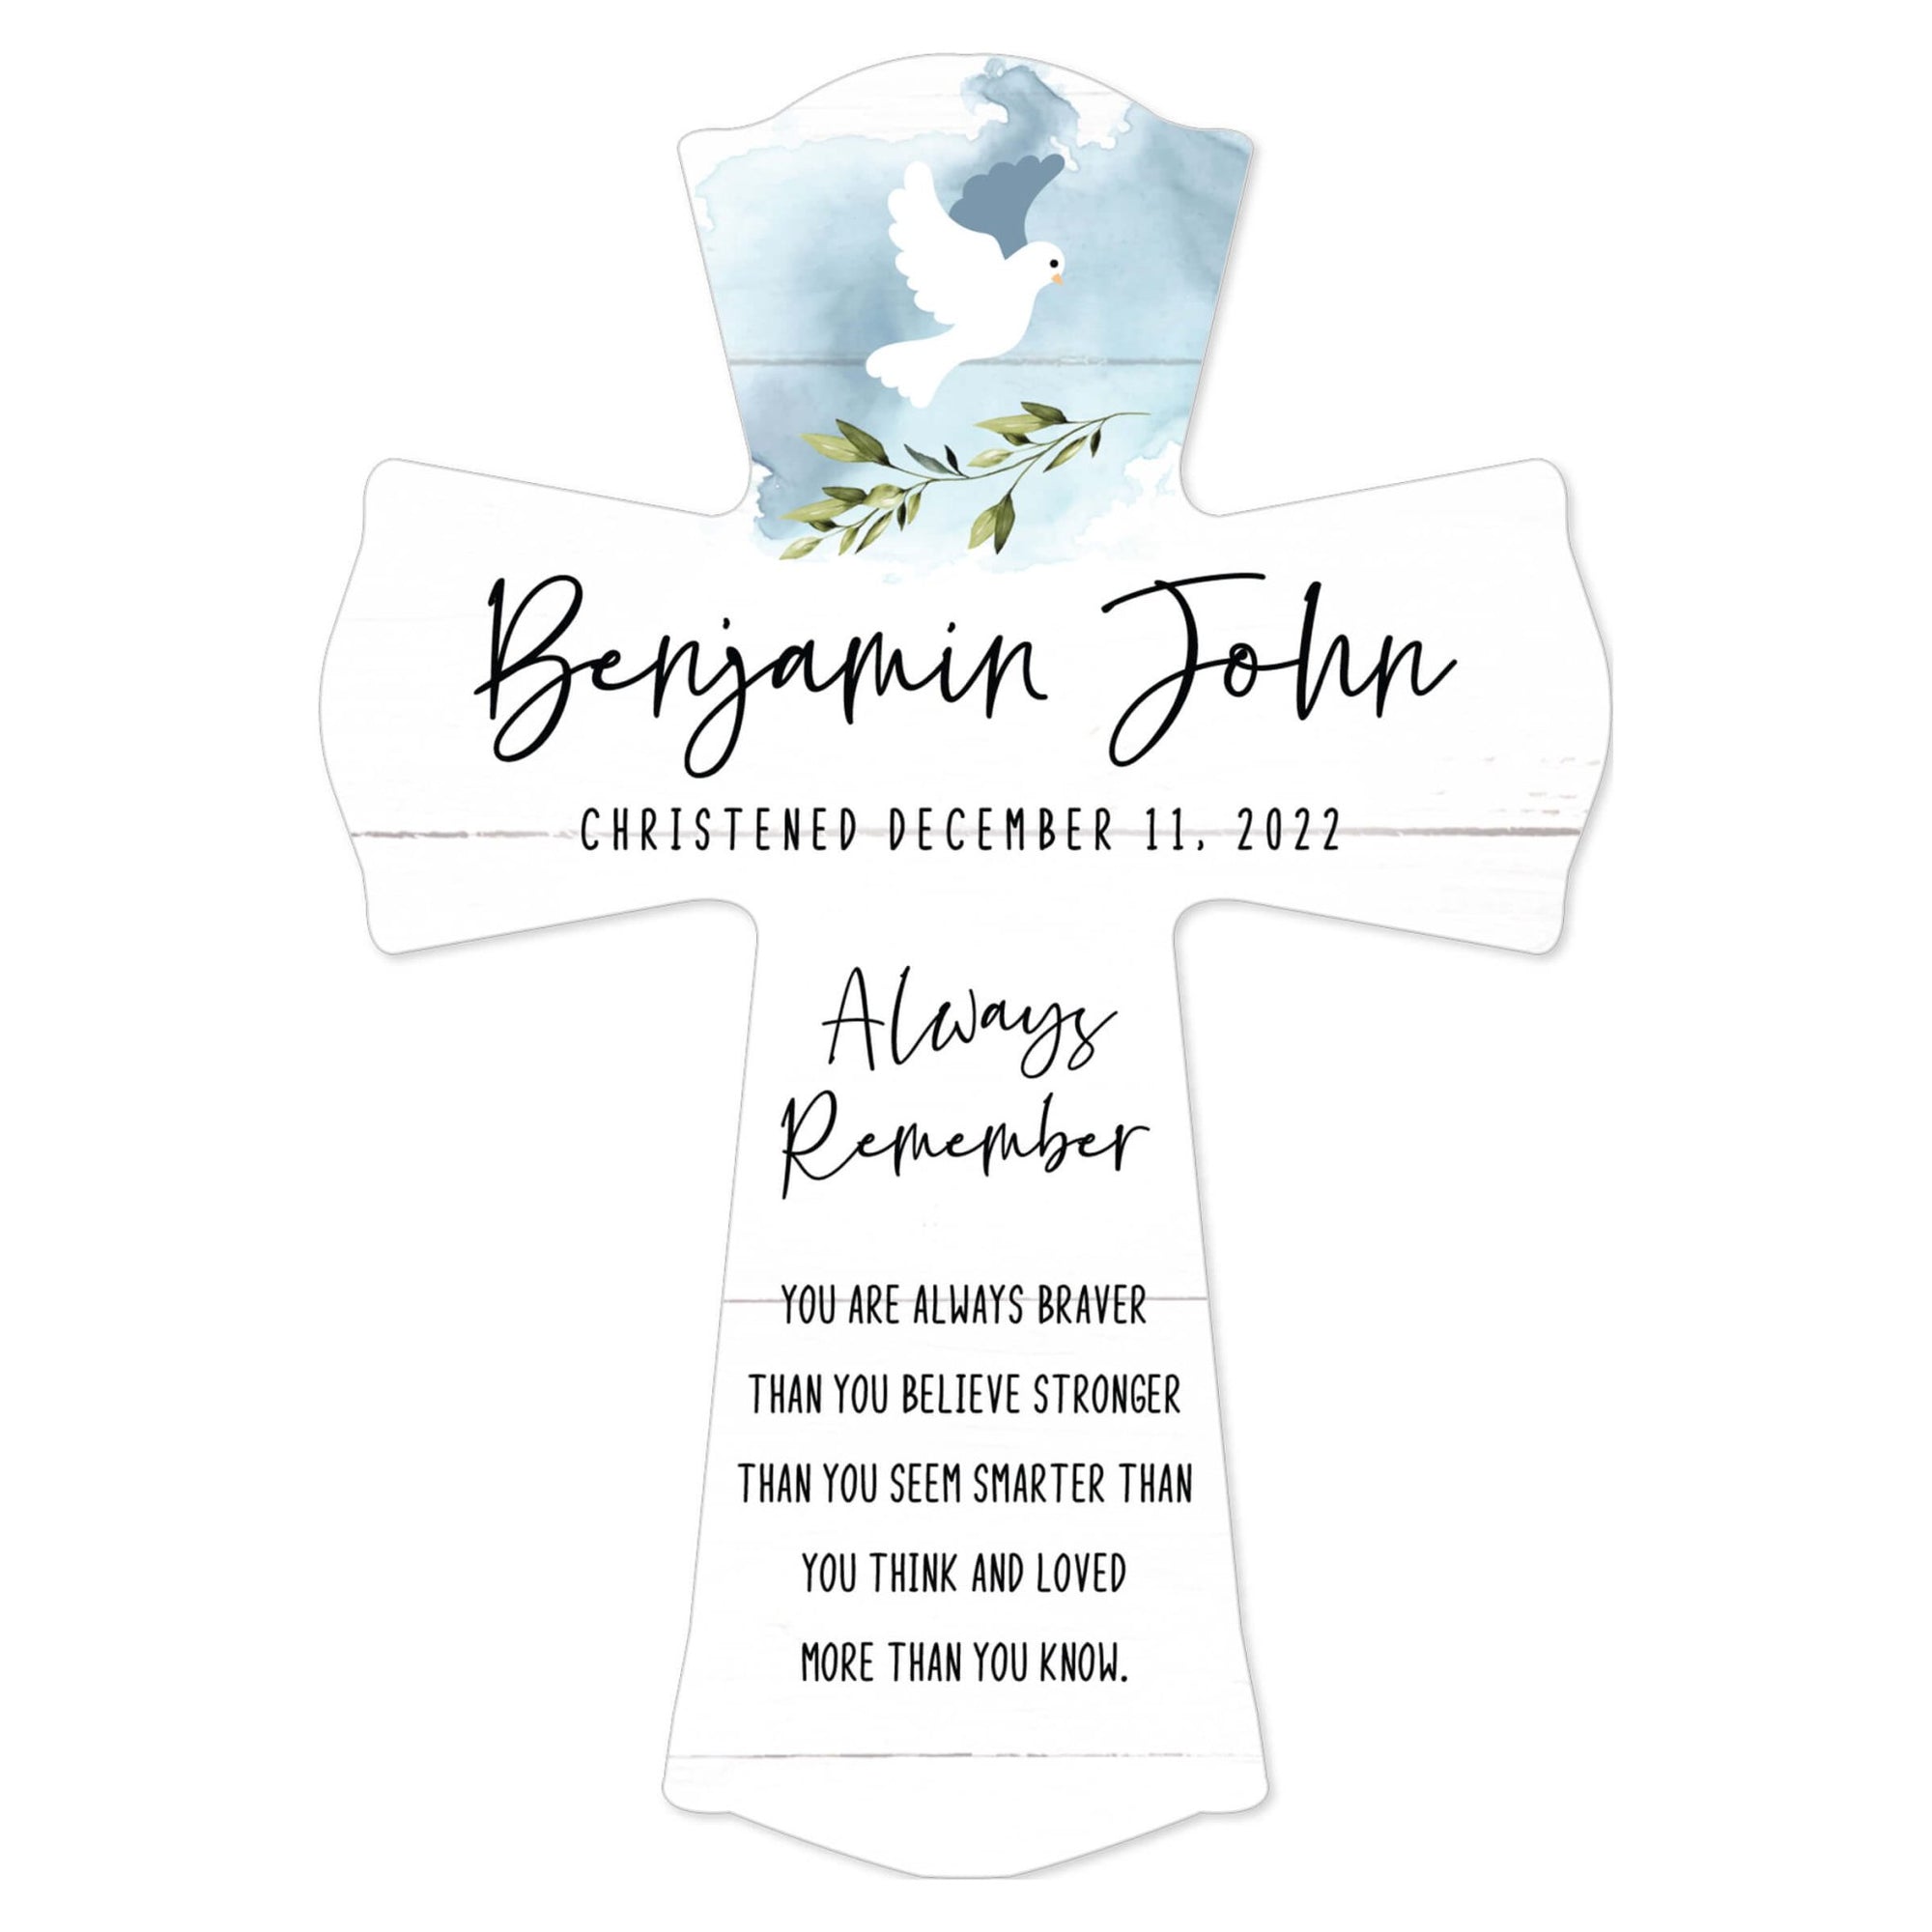 Personalized Wooden Cross for Christening Gifts - Always Remember - LifeSong Milestones